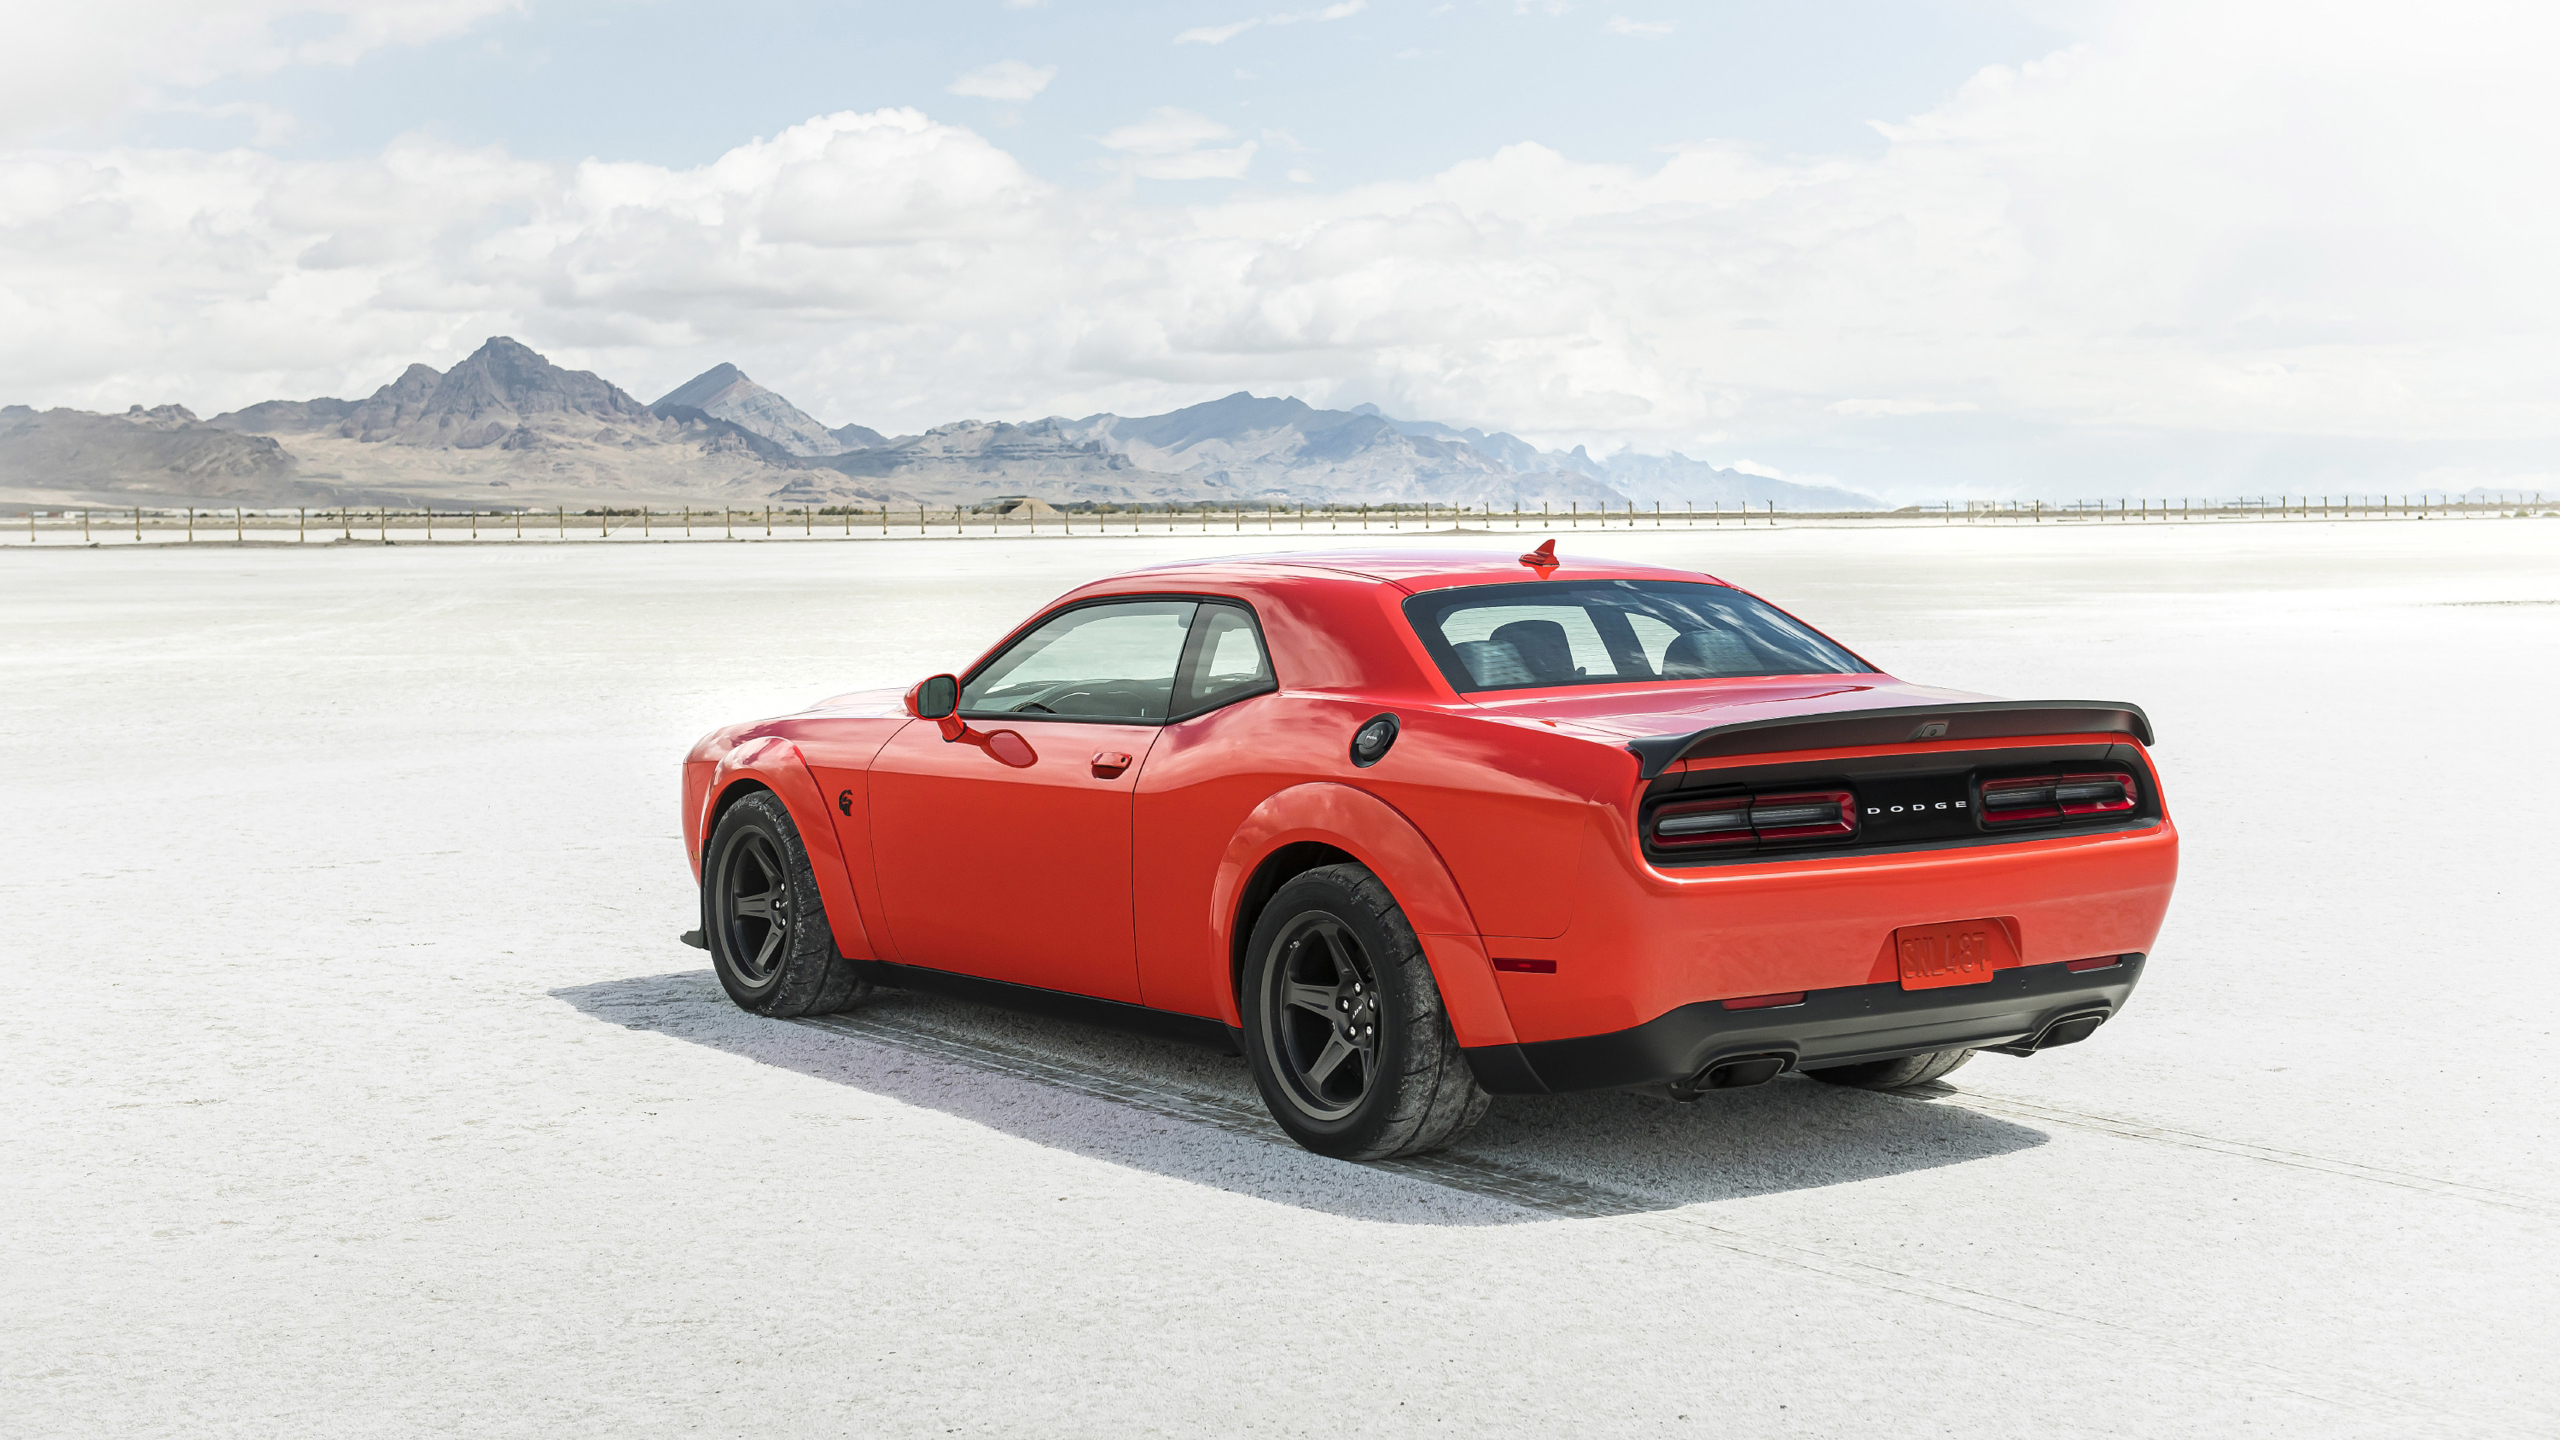 General 2560x1440 Dodge Challenger hellcat muscle cars car vehicle red cars Dodge American cars Stellantis